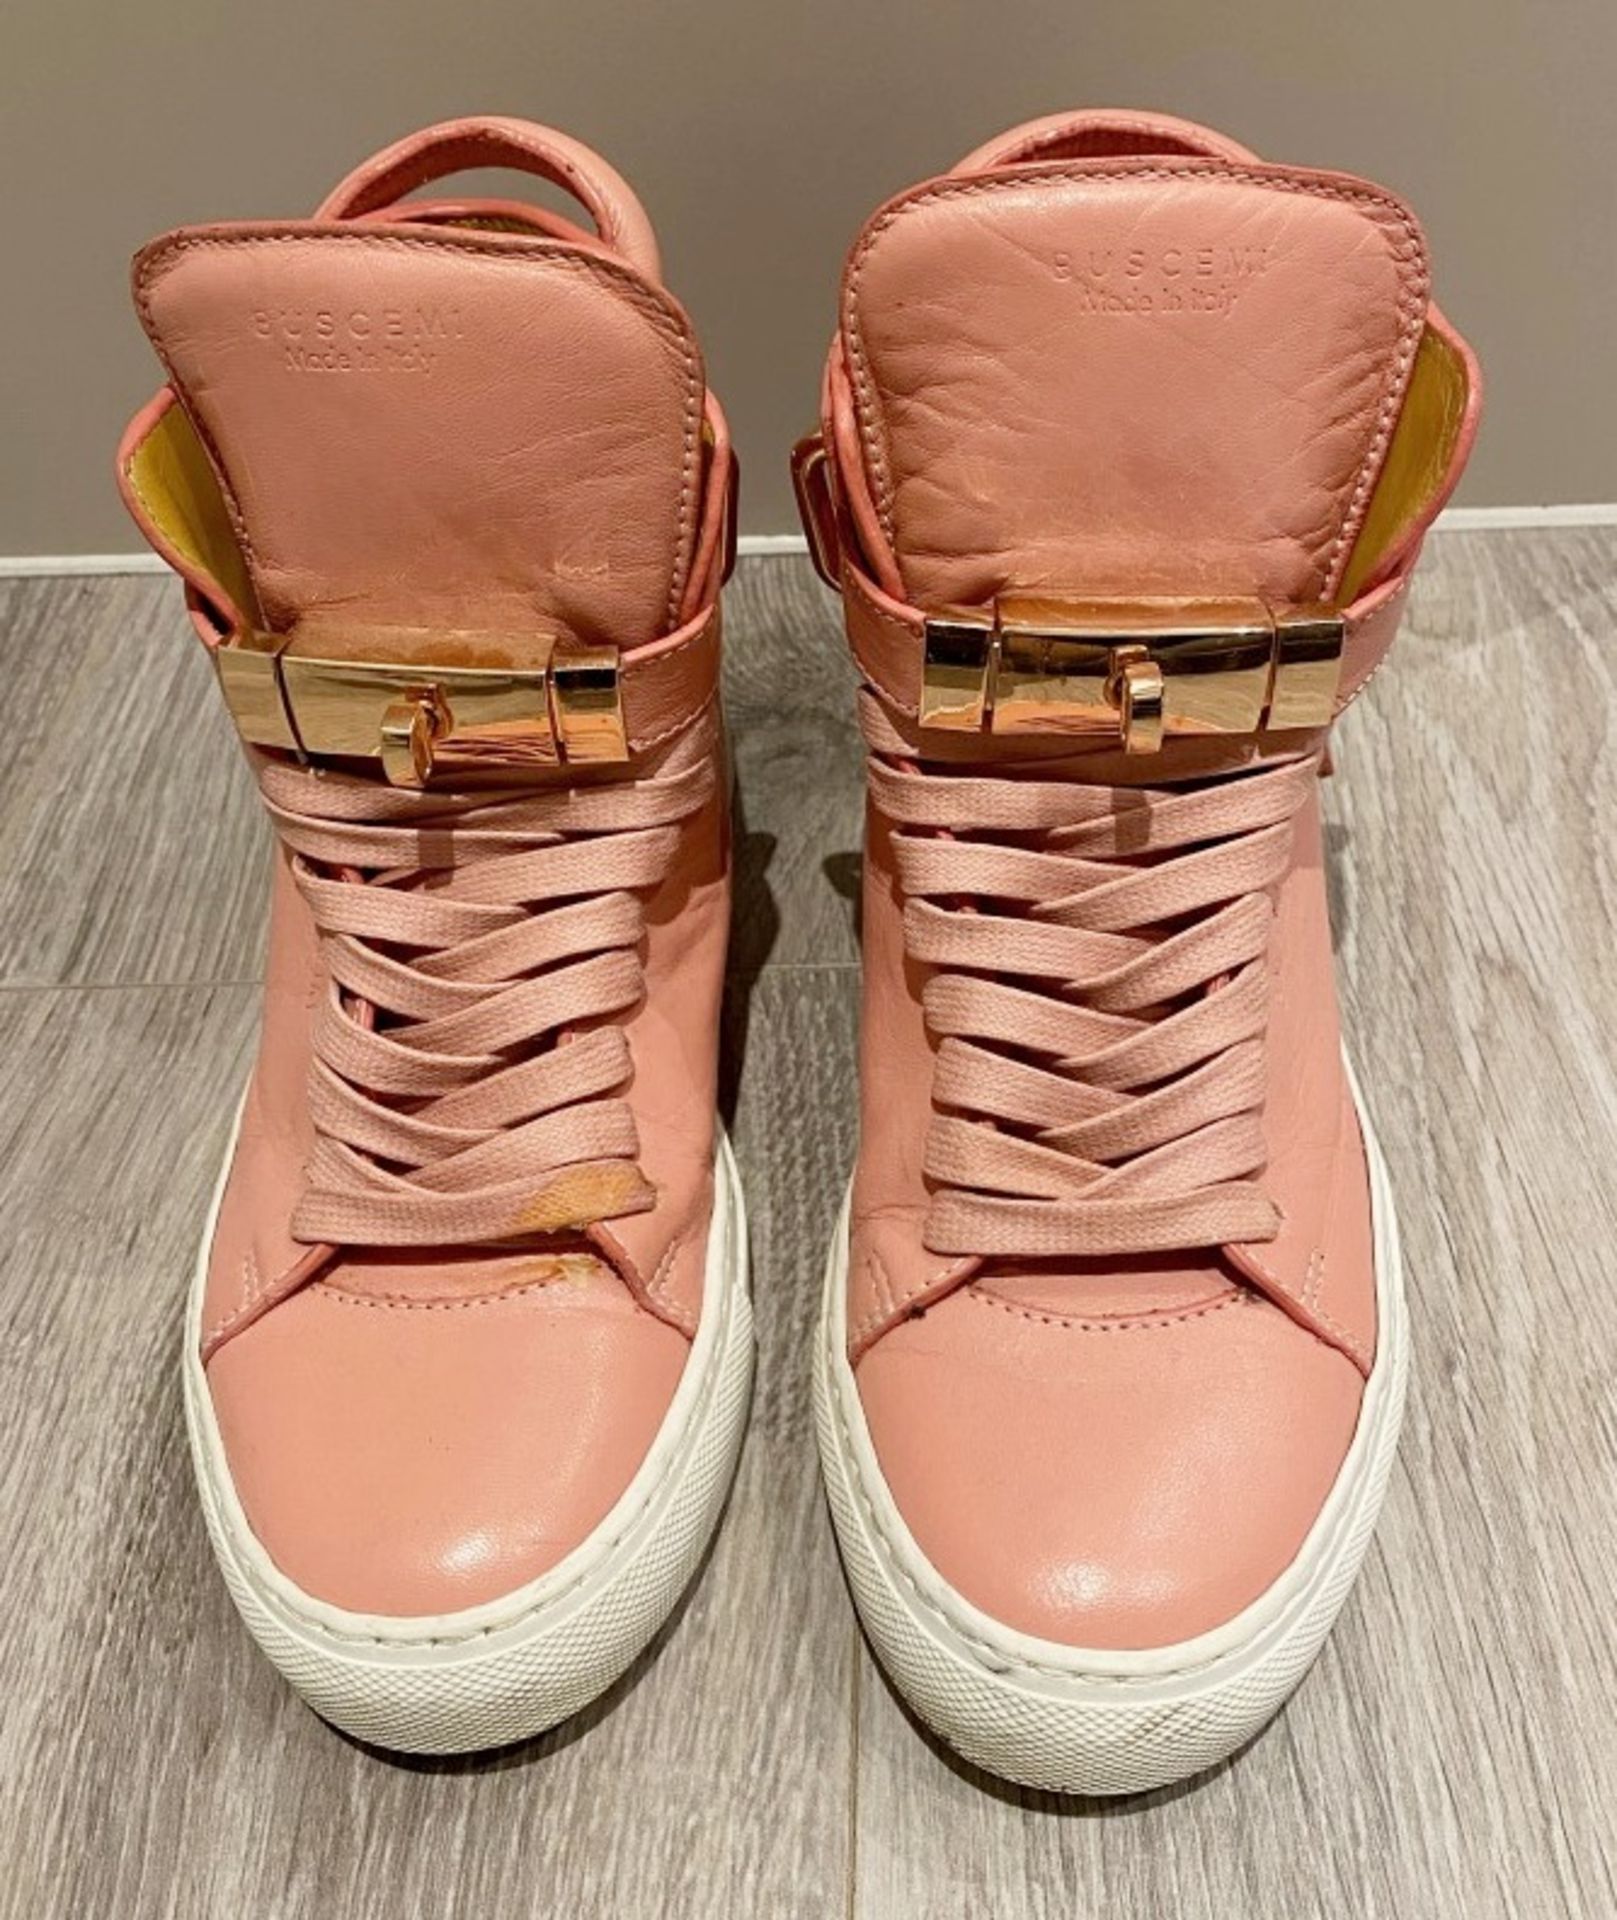 1 x Pair Of Genuine Buscemi Sneakers In Pink - Size: 36 - Preowned in Worn Condition - Ref: LOT22 - - Image 5 of 5